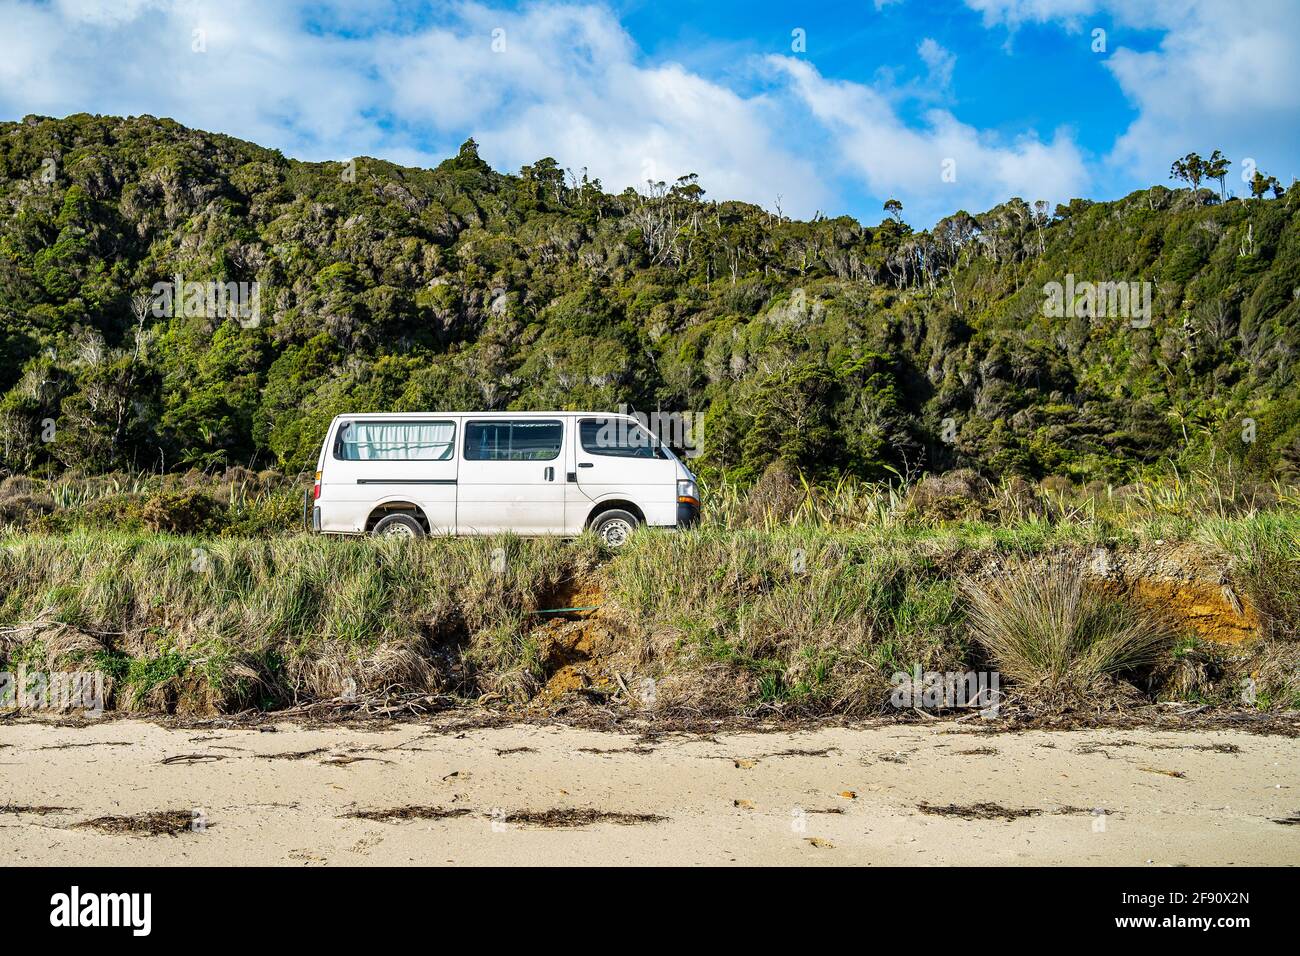 White van passing through the plain with trees and greenery background Stock Photo